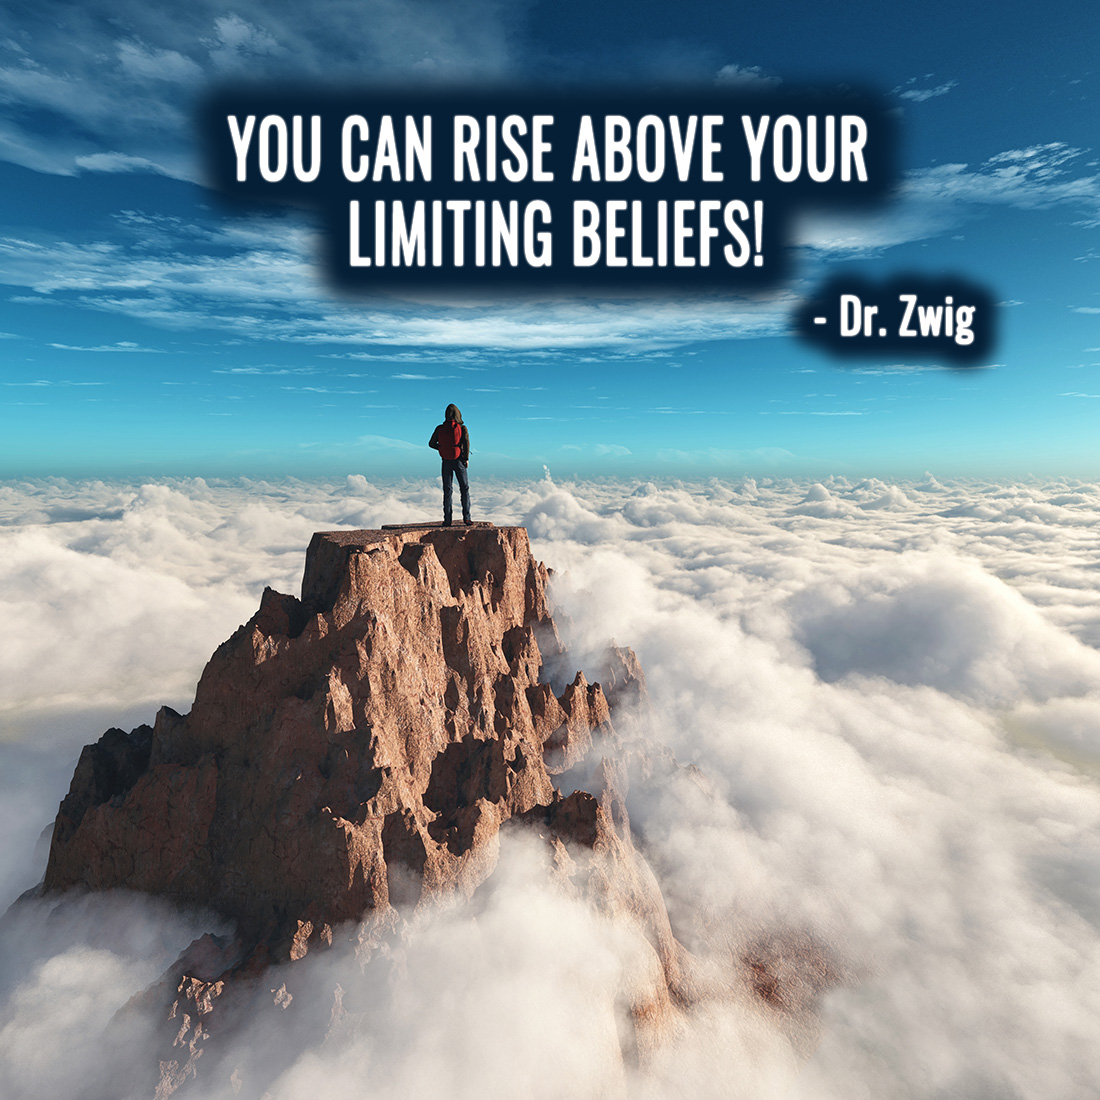 You can rise above your limiting beliefs!